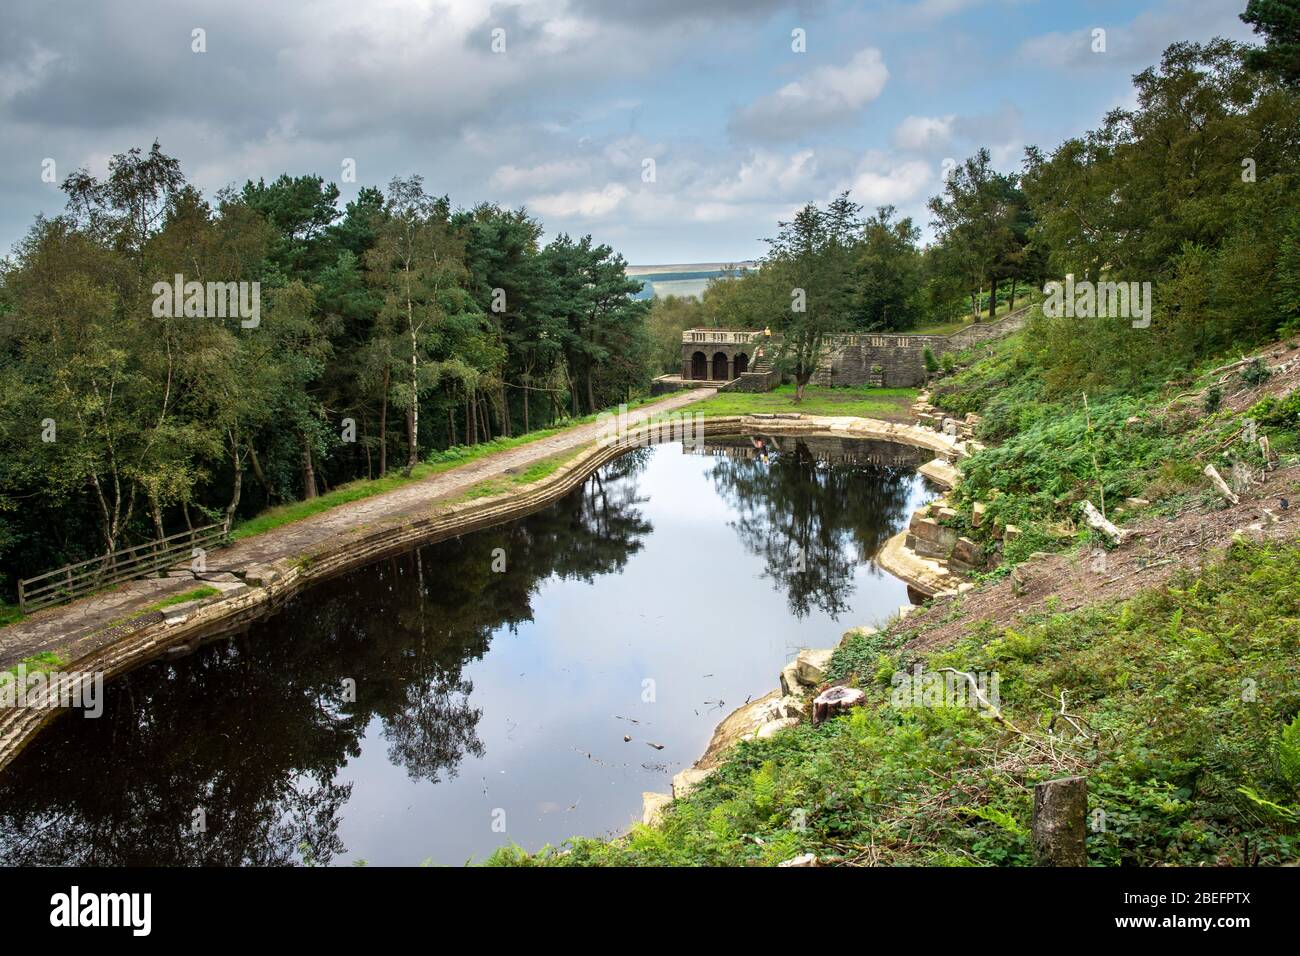 Rivington Terraced Gardens ,Horwich Bolton Lancashire is a magical place of hidden paths, caves, structures and lakes covering 45 acres of hillside. T Stock Photo